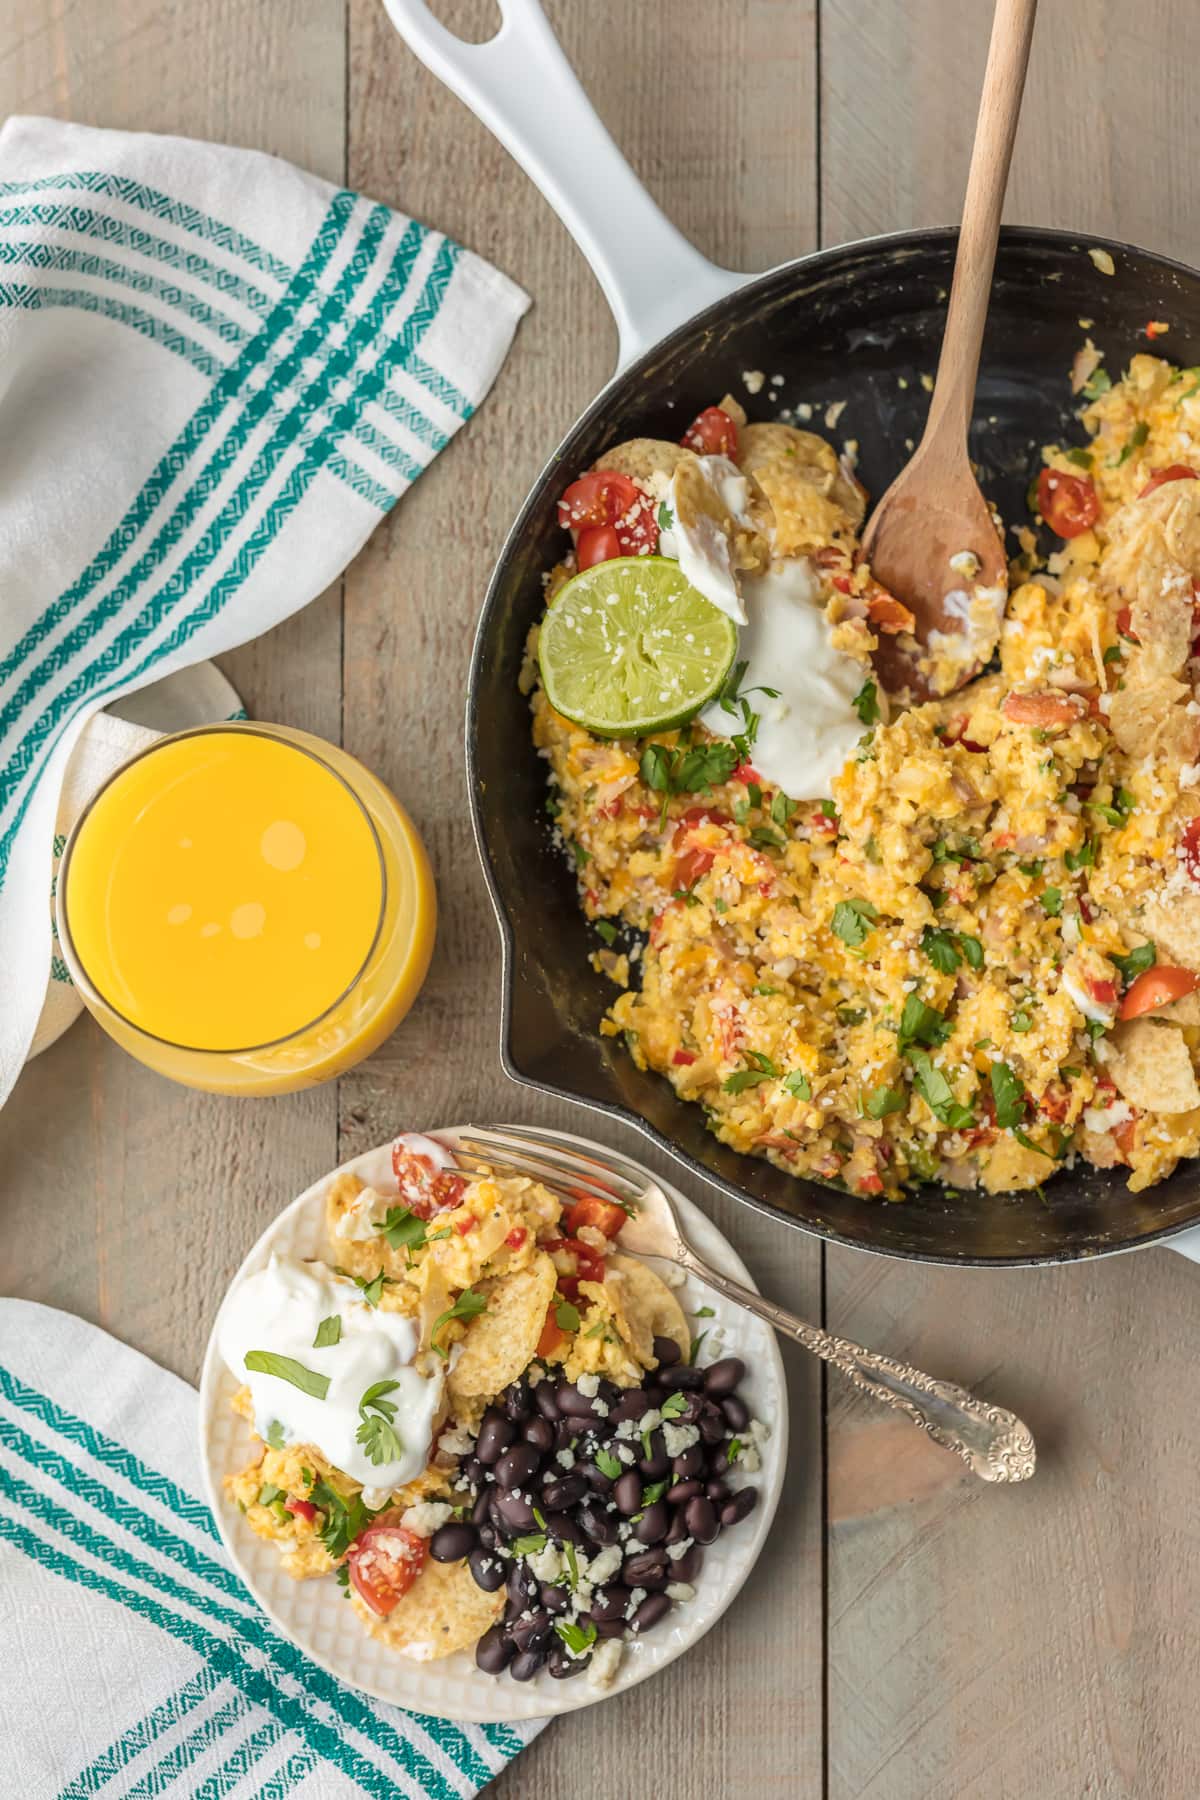 A skillet of cheesy migas, next to a plate of migas and black beans